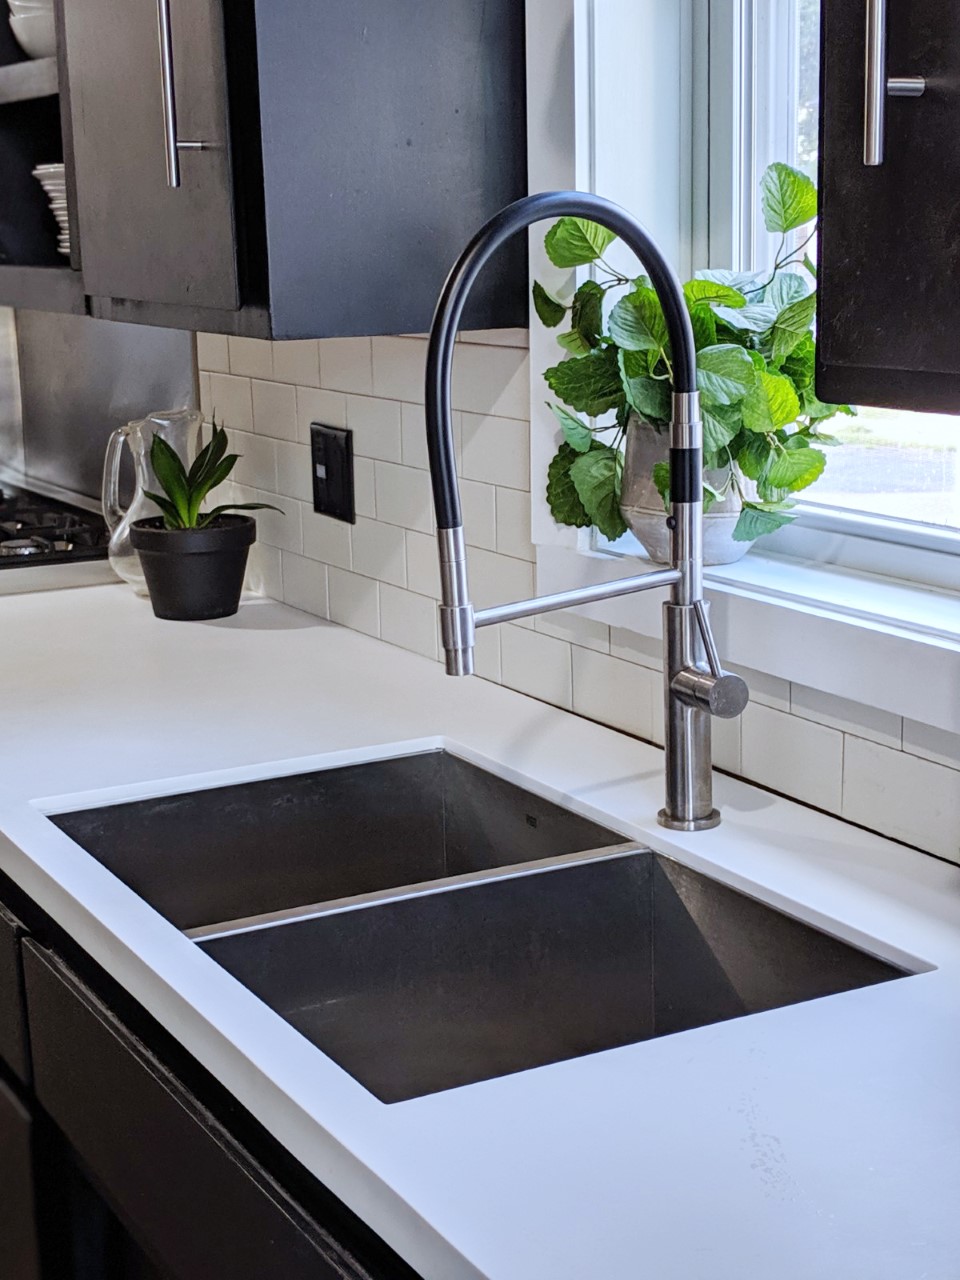  THE TOP 5 KITCHEN FAUCETS YOU NEED IN YOUR HOME TODAY! | VIGO Industries - Kitchen Design Ideas - Kitchen Remodels - Home Interior - Modern Kitchen Sinks and Faucets 